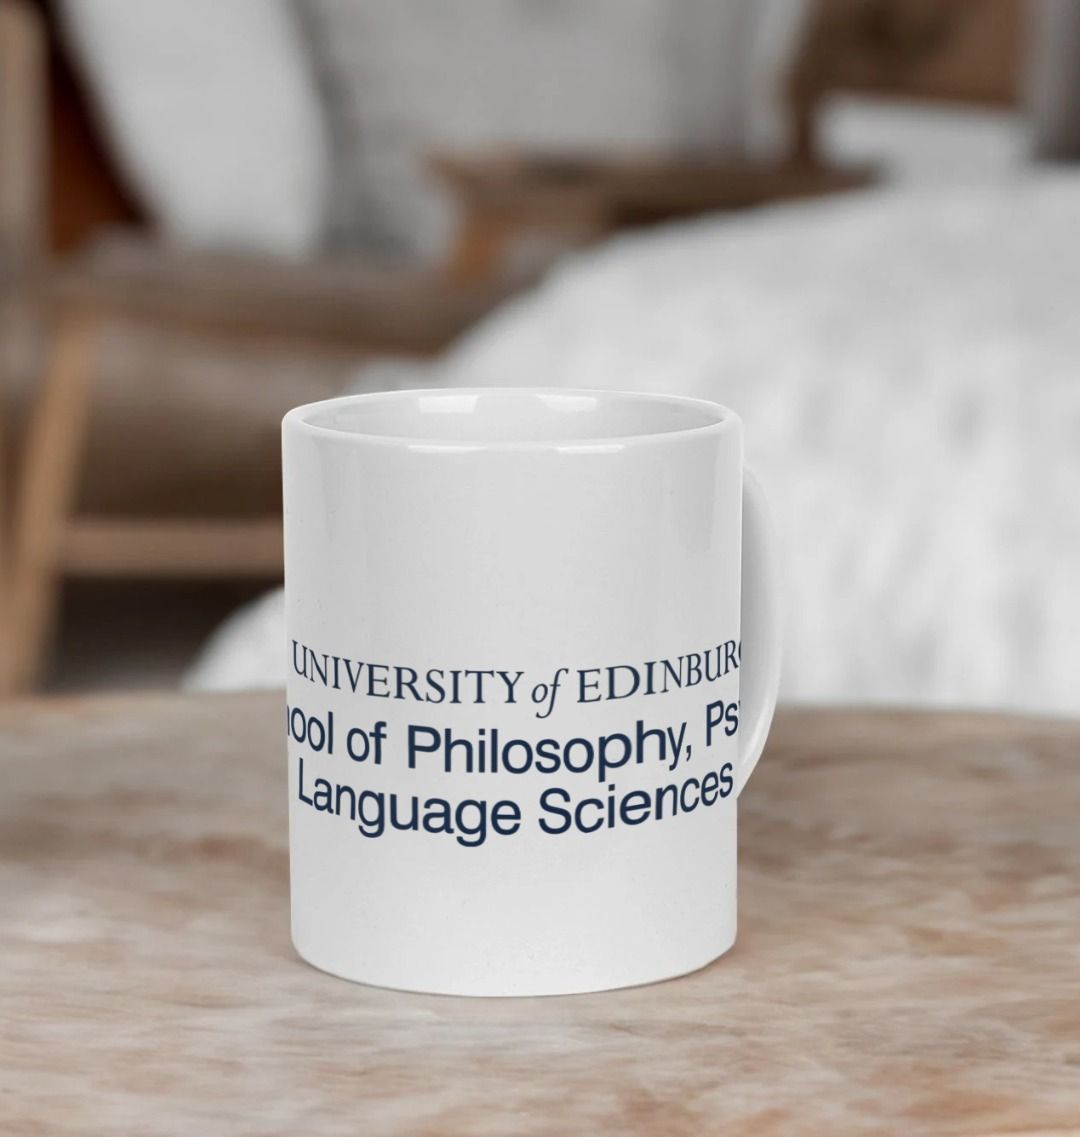 White School of Philosophy, Psychology and Language Sciences Mug with multi-colour printed University crest and logo